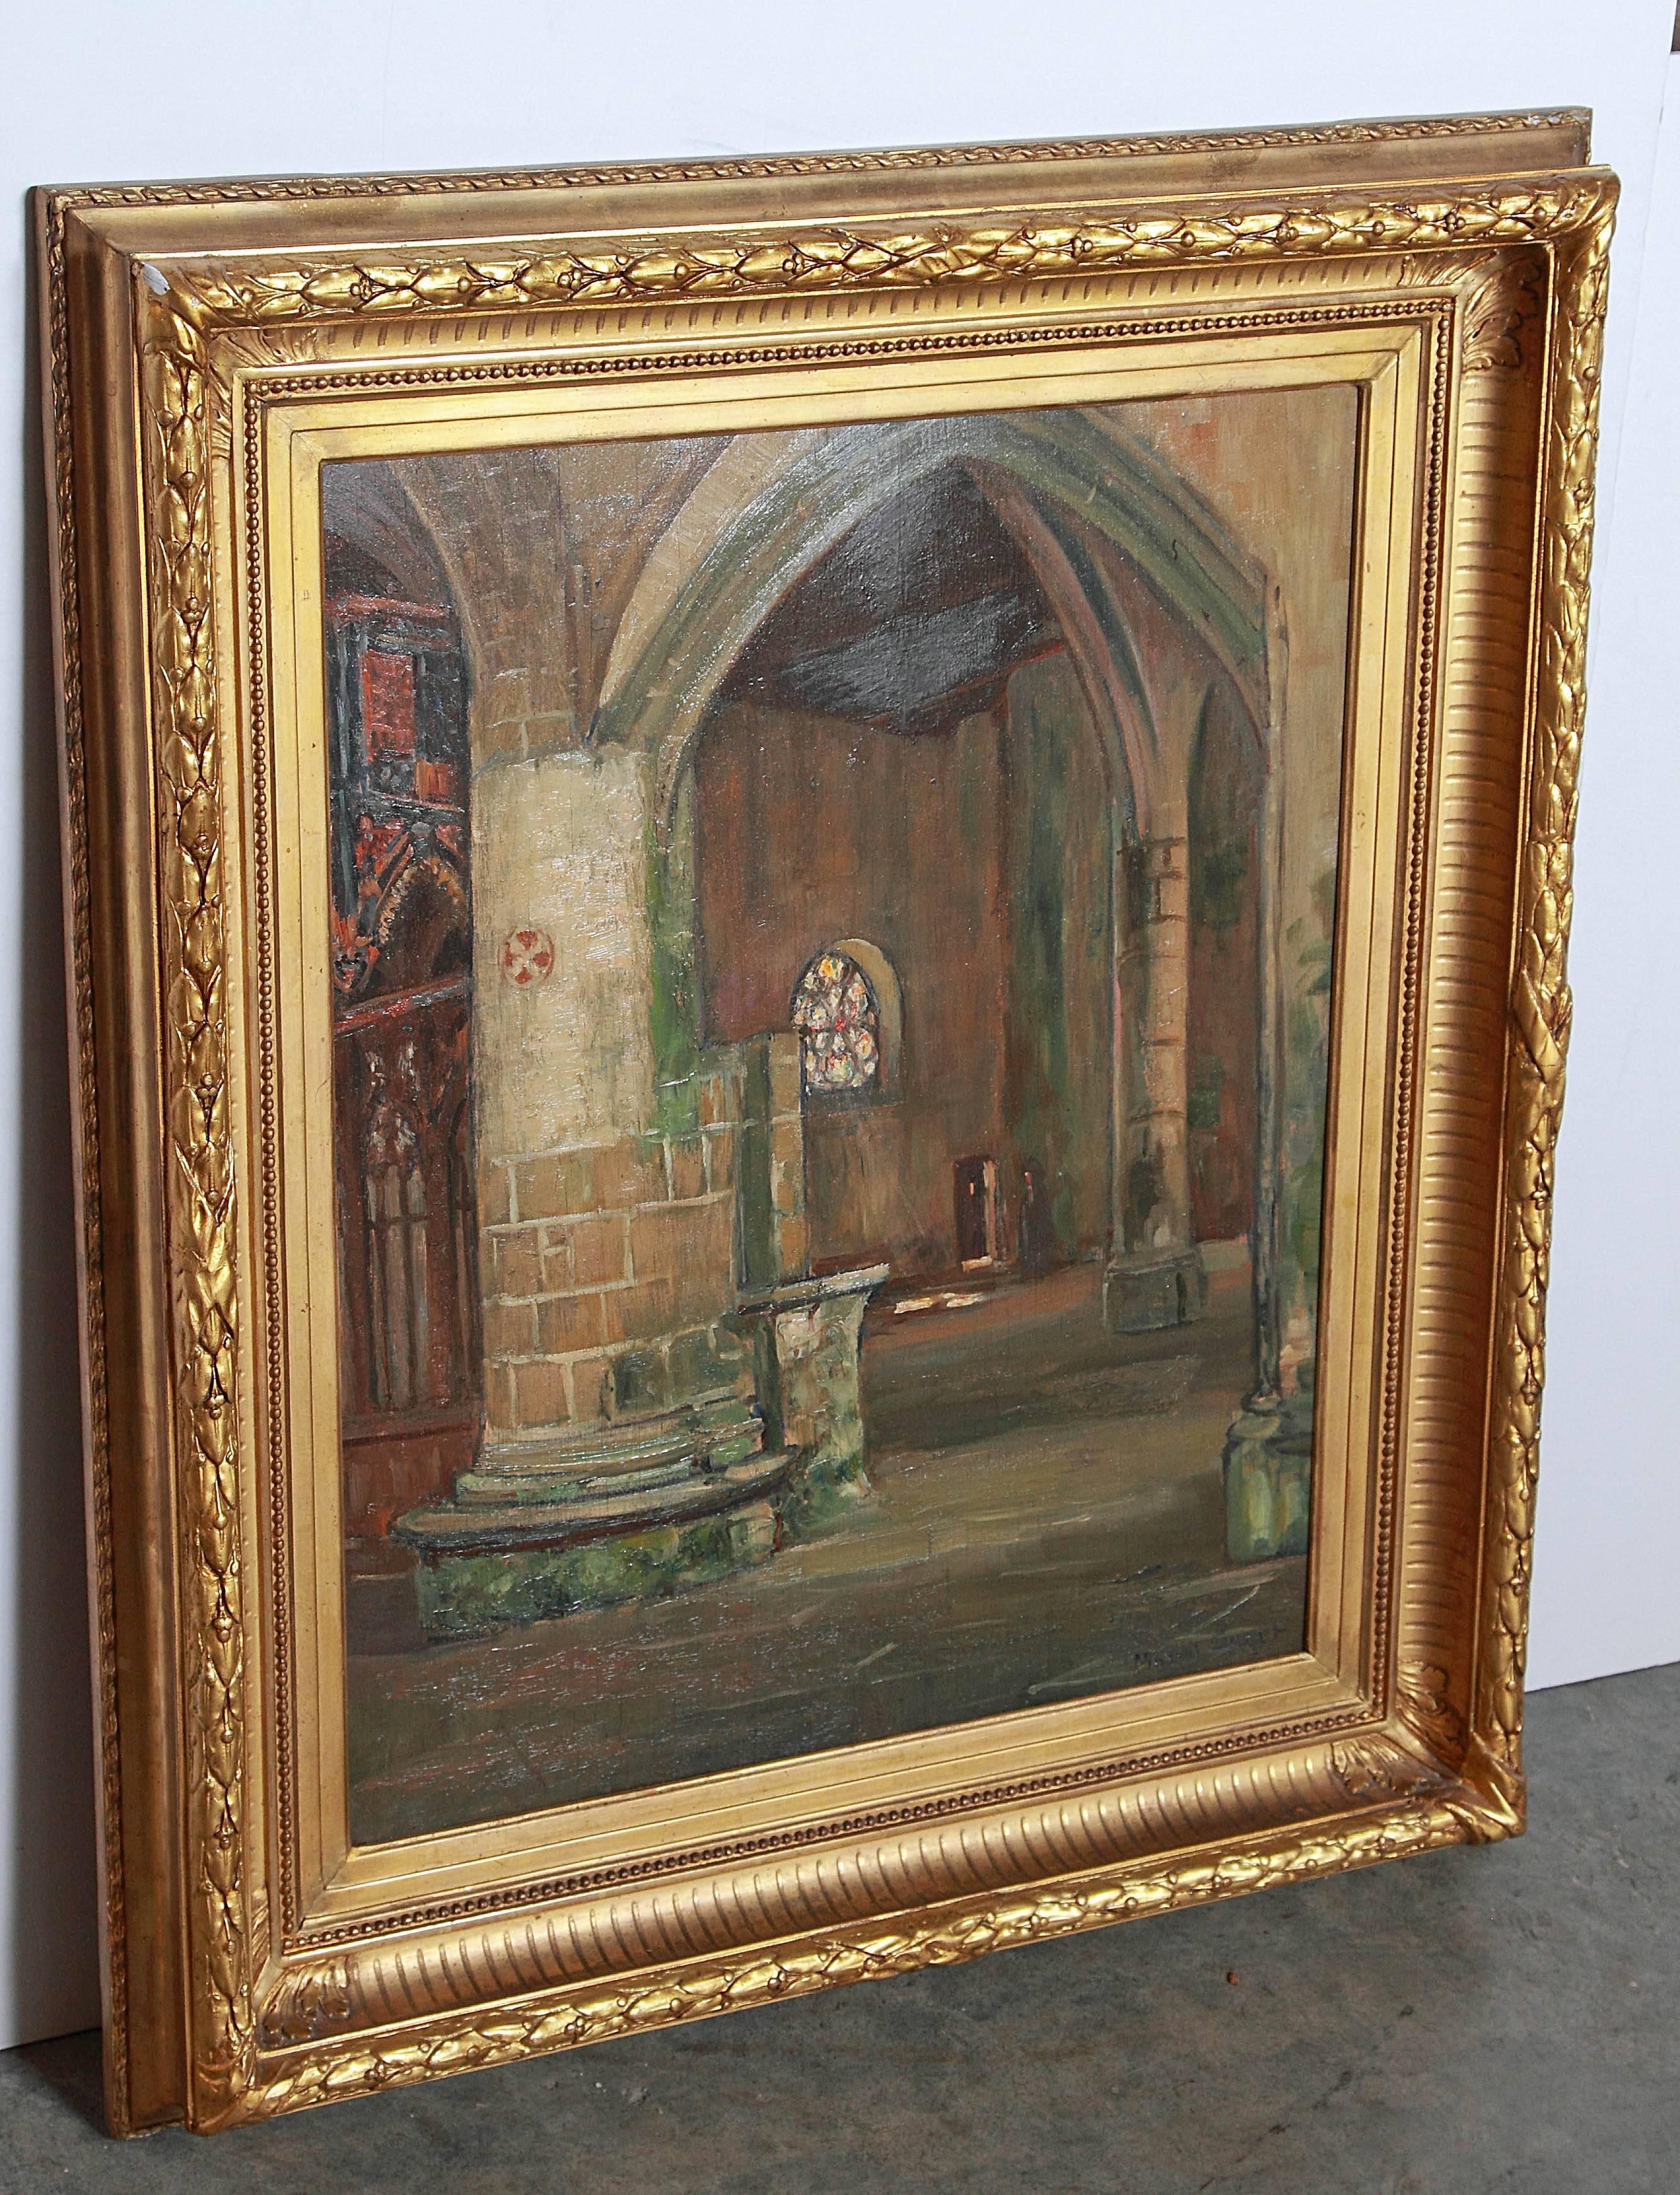 This serene oil painting on board depicts the beautiful Gothic interior of a French church.  It has been signed by Marcel Canet (1875-1959) in the lower right hand corner.  The beautiful giltwood frame has motifs of laurel leaves and berries with